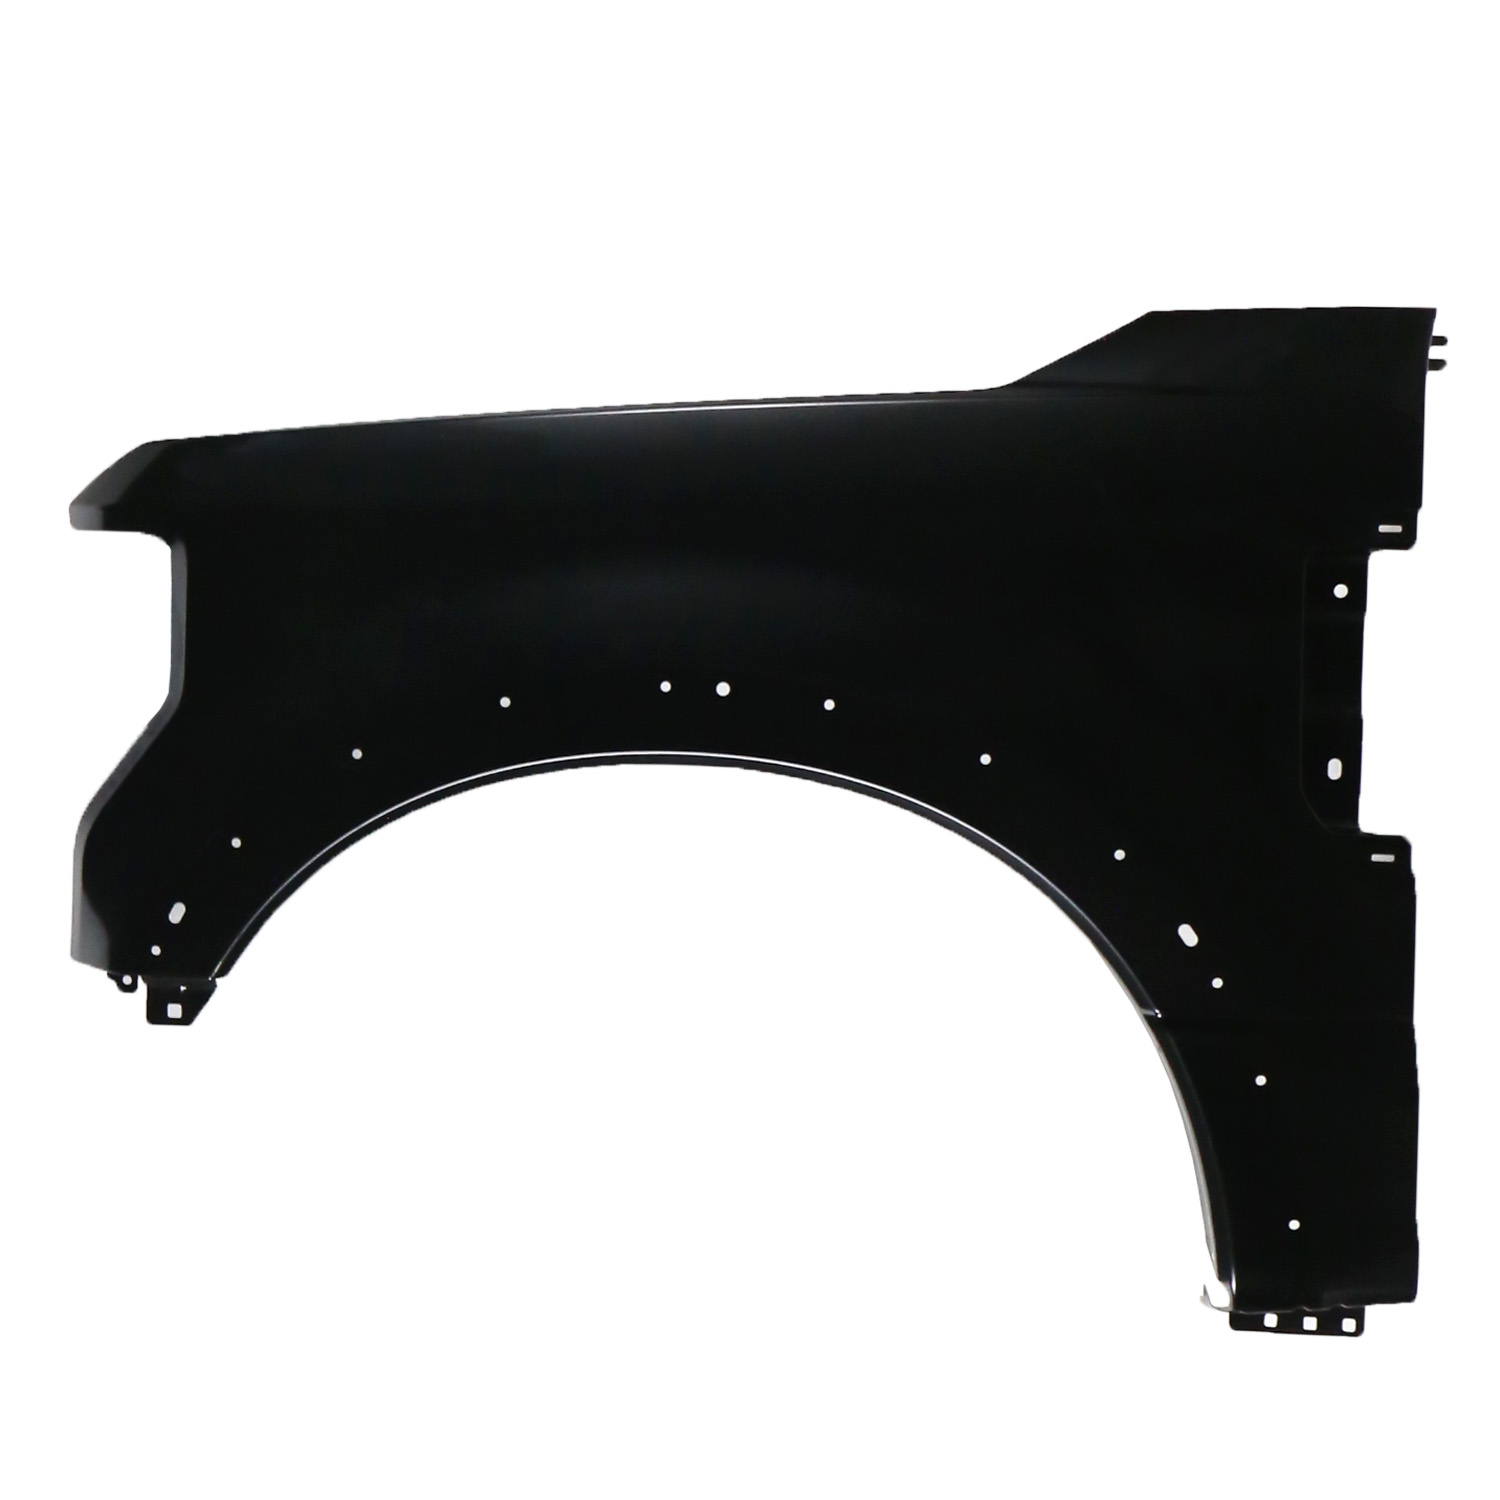 Aftermarket FENDERS for FORD - F-350 SUPER DUTY, F-350 SUPER DUTY,17-19,LT Front fender assy